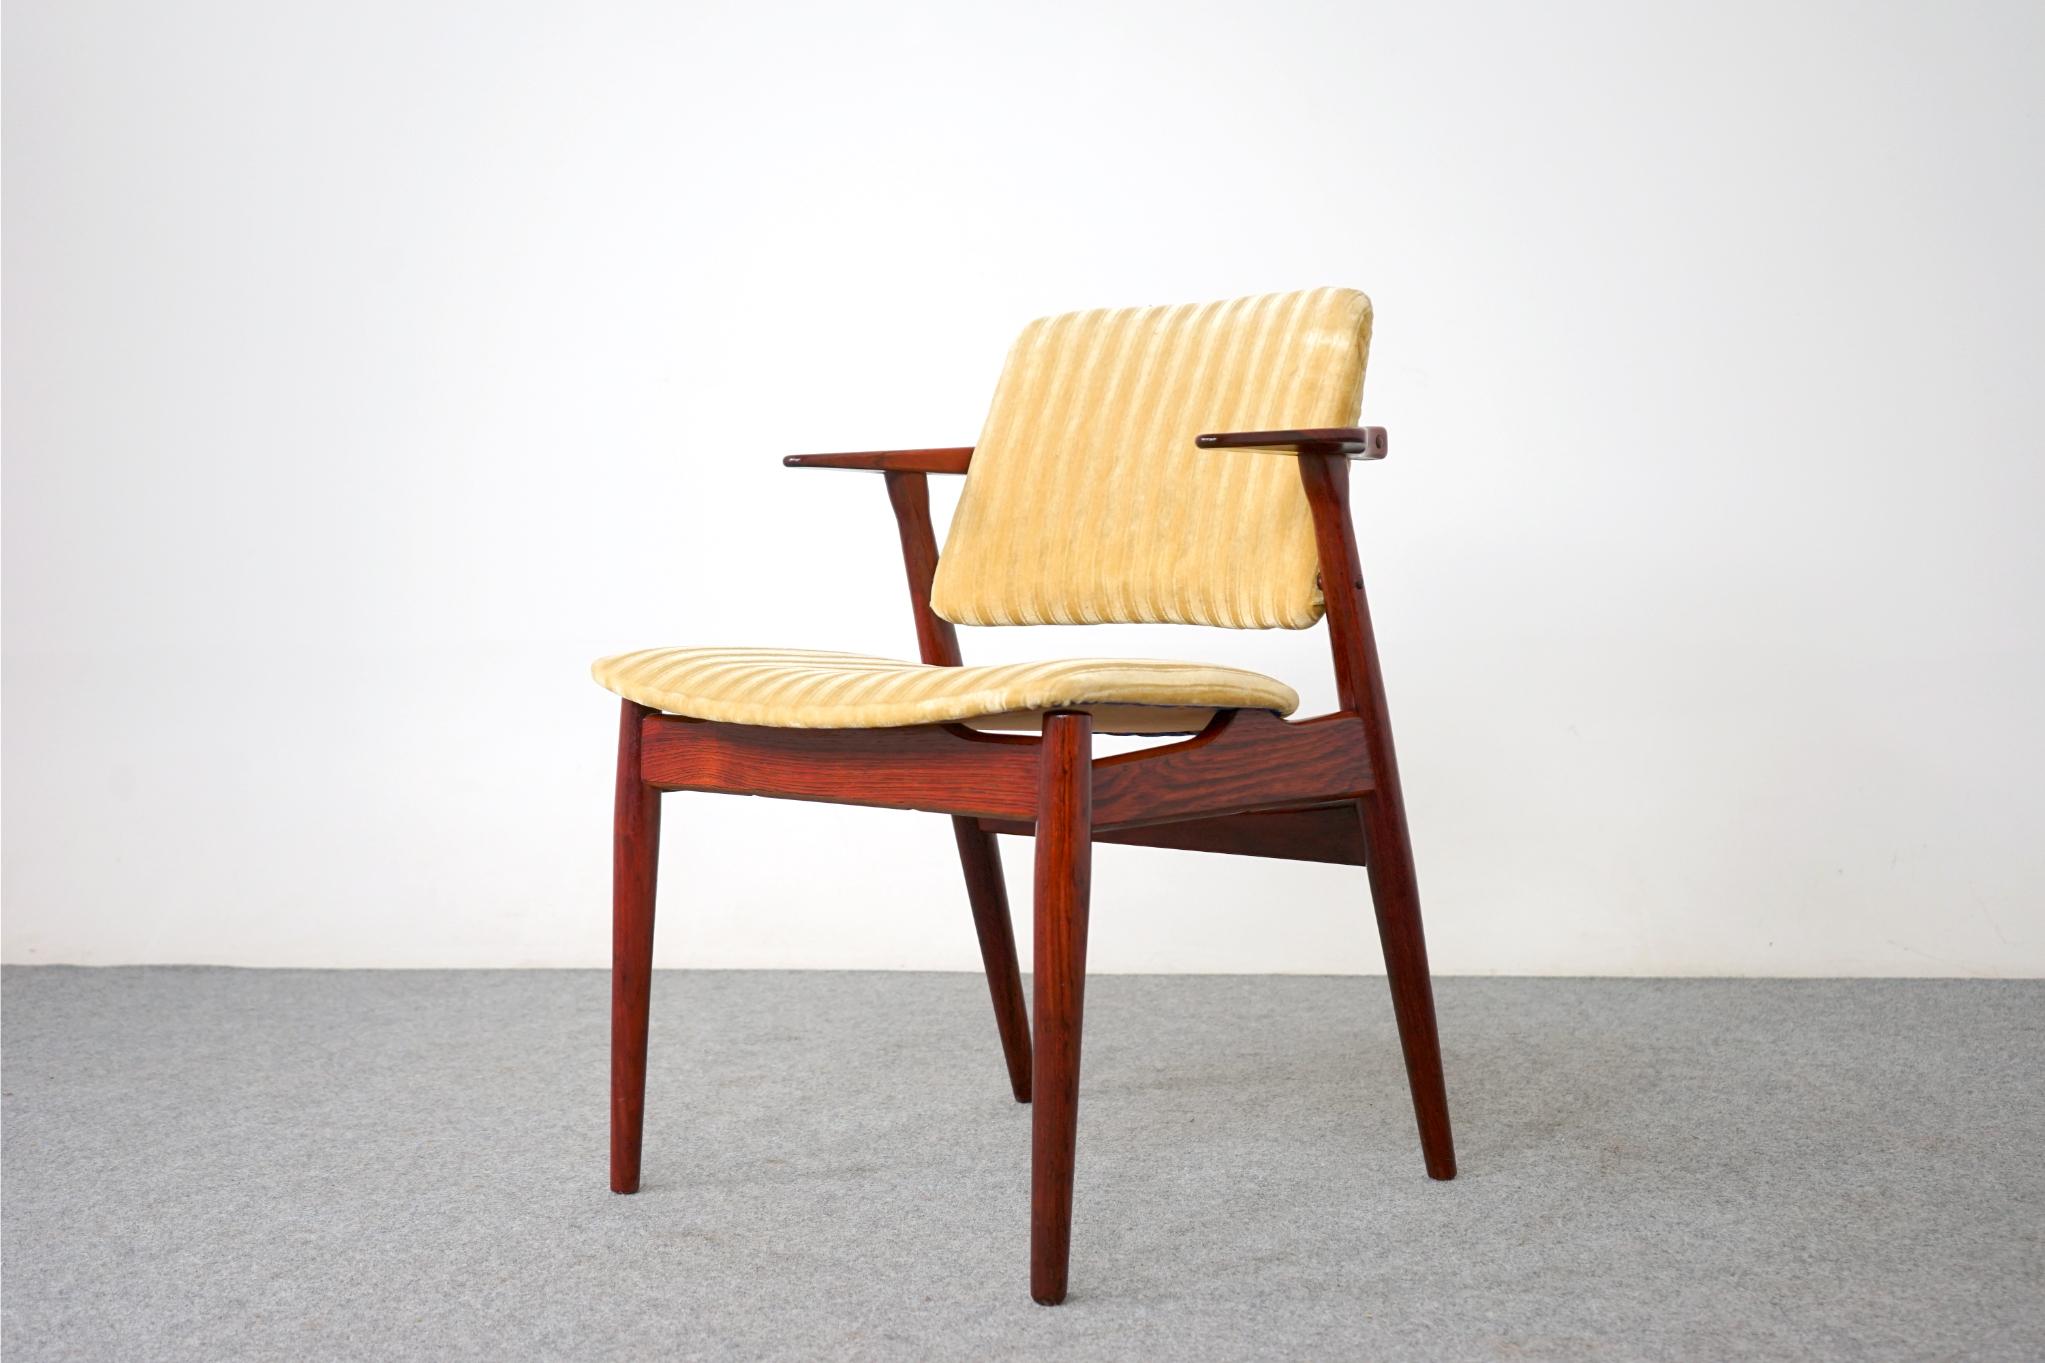 Rosewood Danish arm chair by Arne Vodder, circa 1950's. Beautifully sculpted frame with stunning lines, comfort without an imposing footprint! Floating seat and back offer a light elegant feel. Original striped yellow velvet upholstery, brighten up